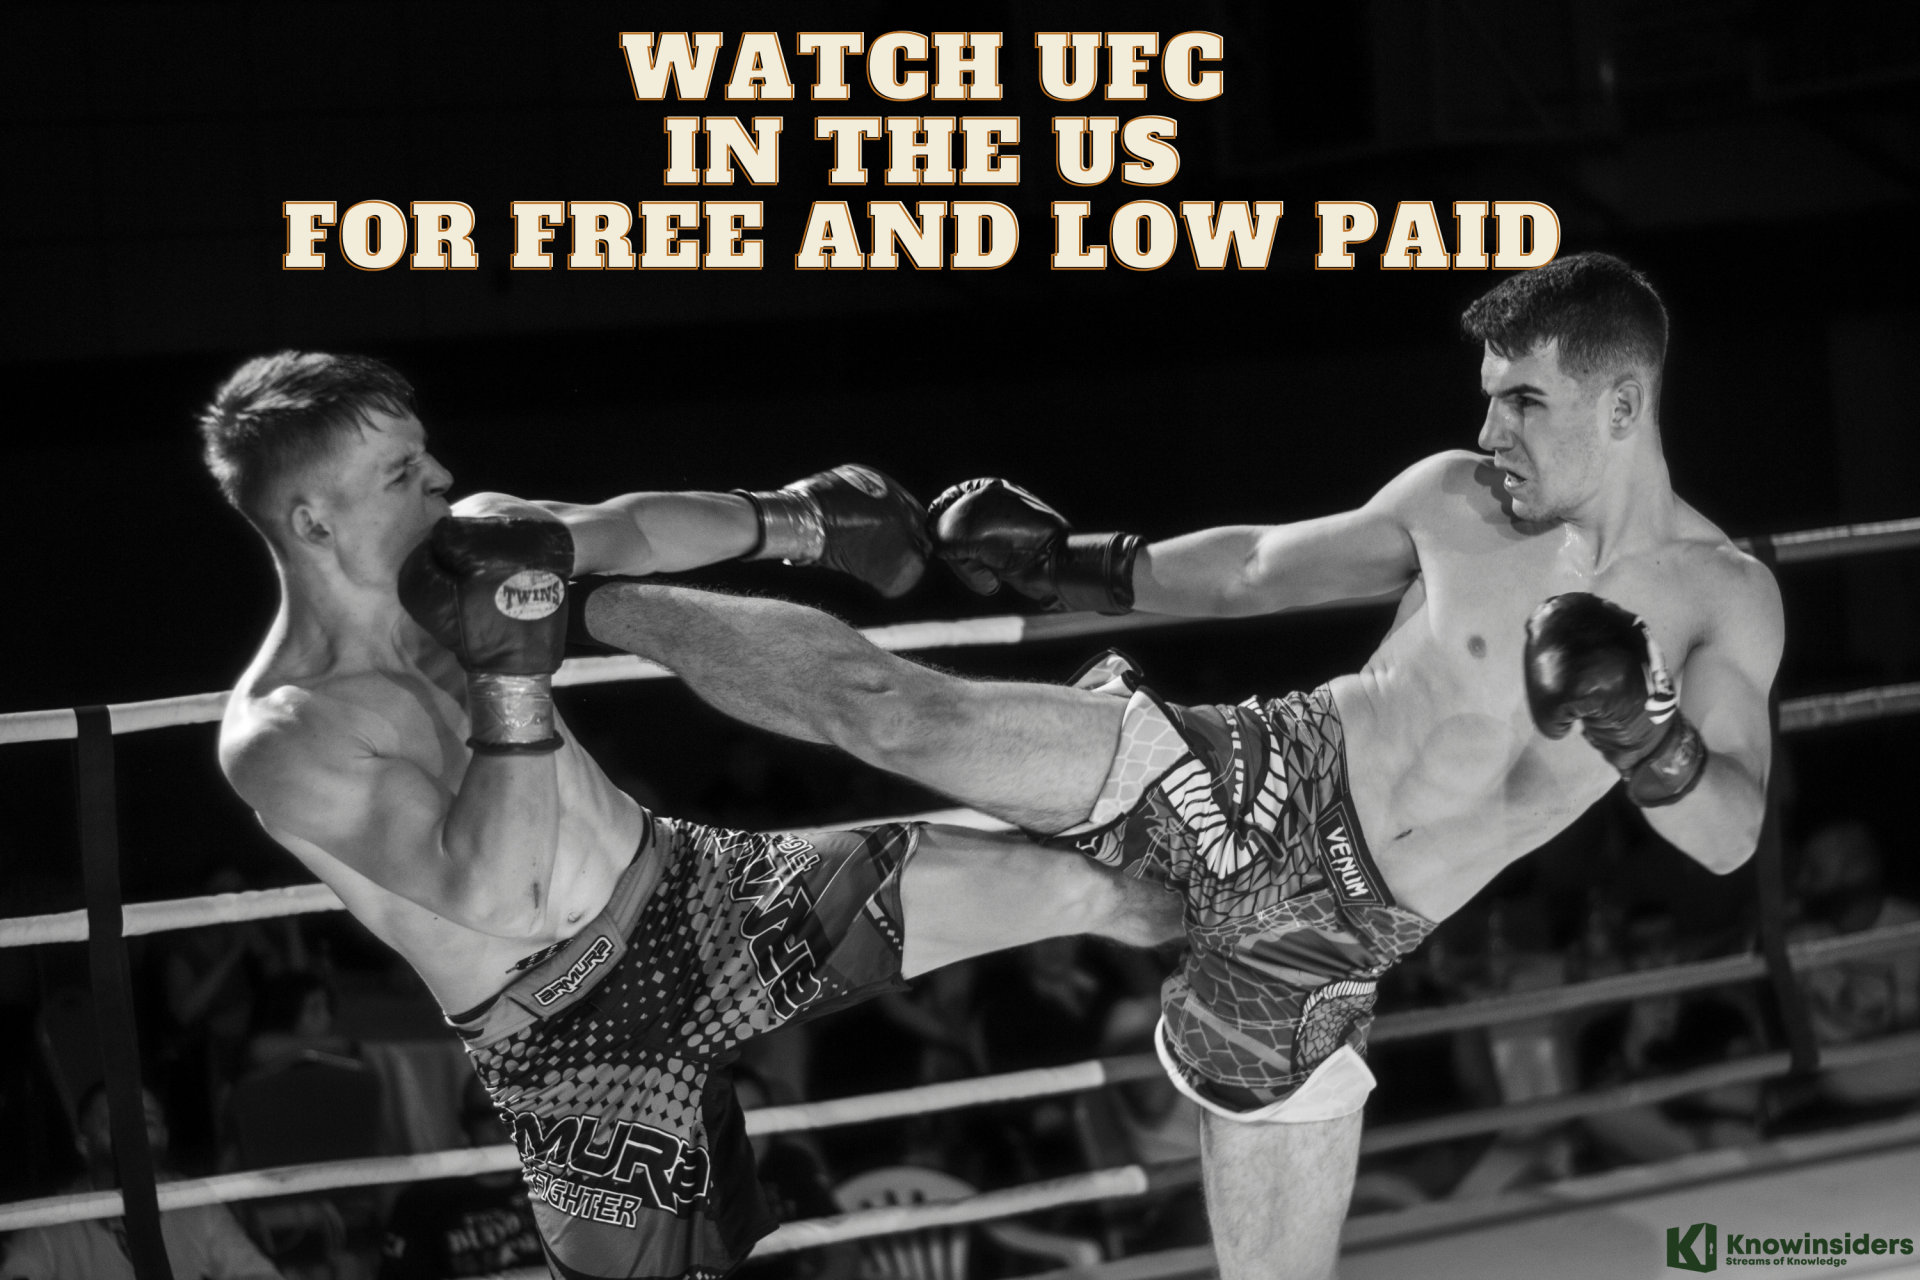 Watch UFC in US for FREE and Low Paid